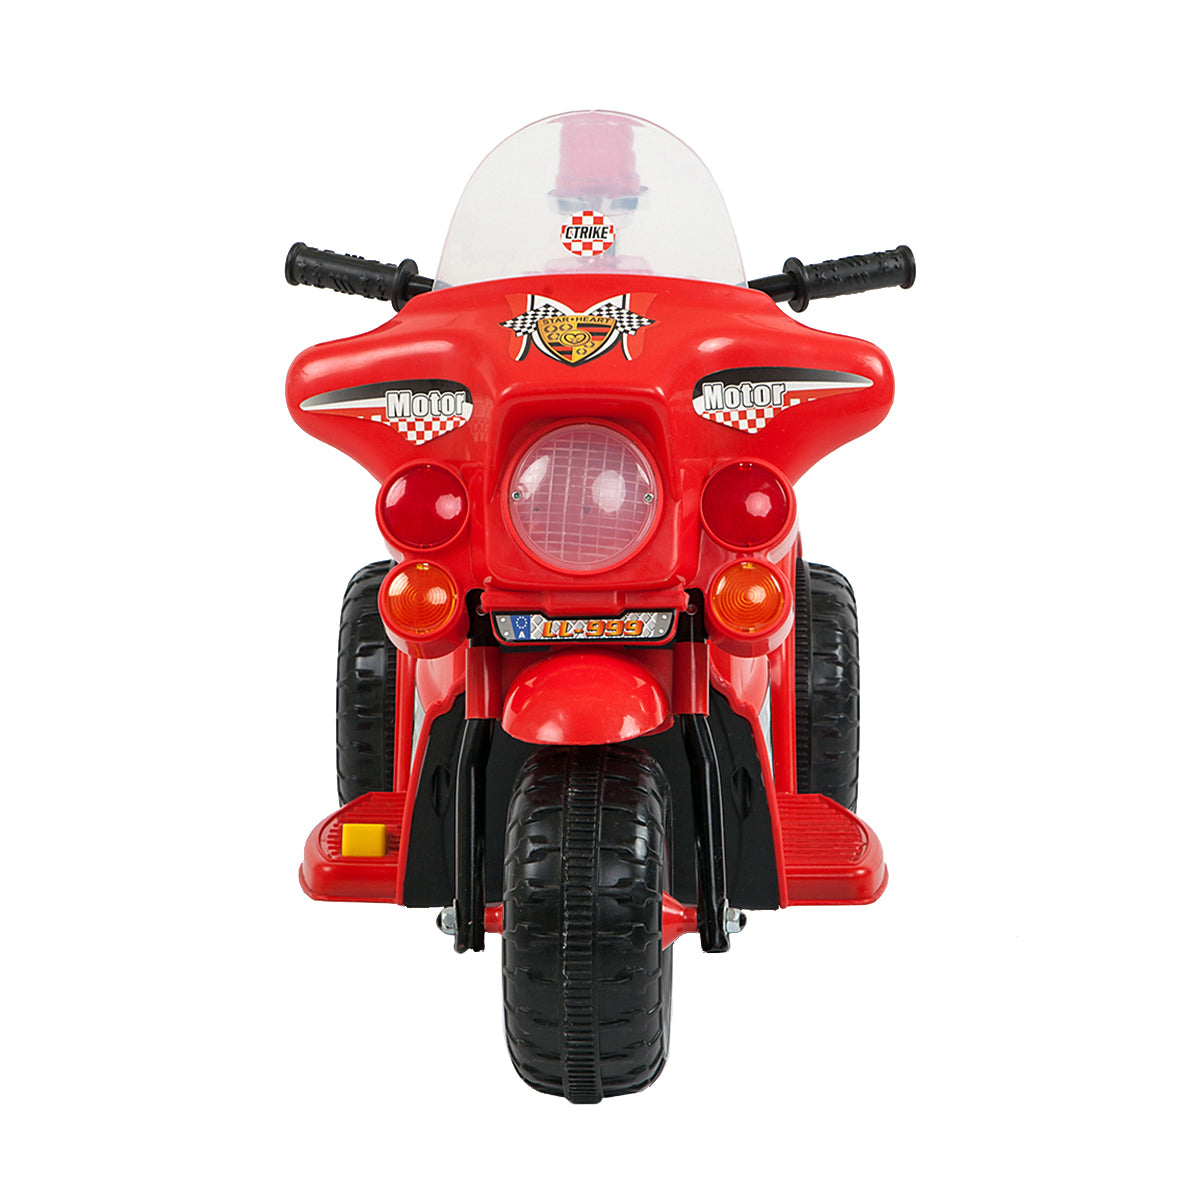 Children's Electric Ride-on Motorcycle (Red)